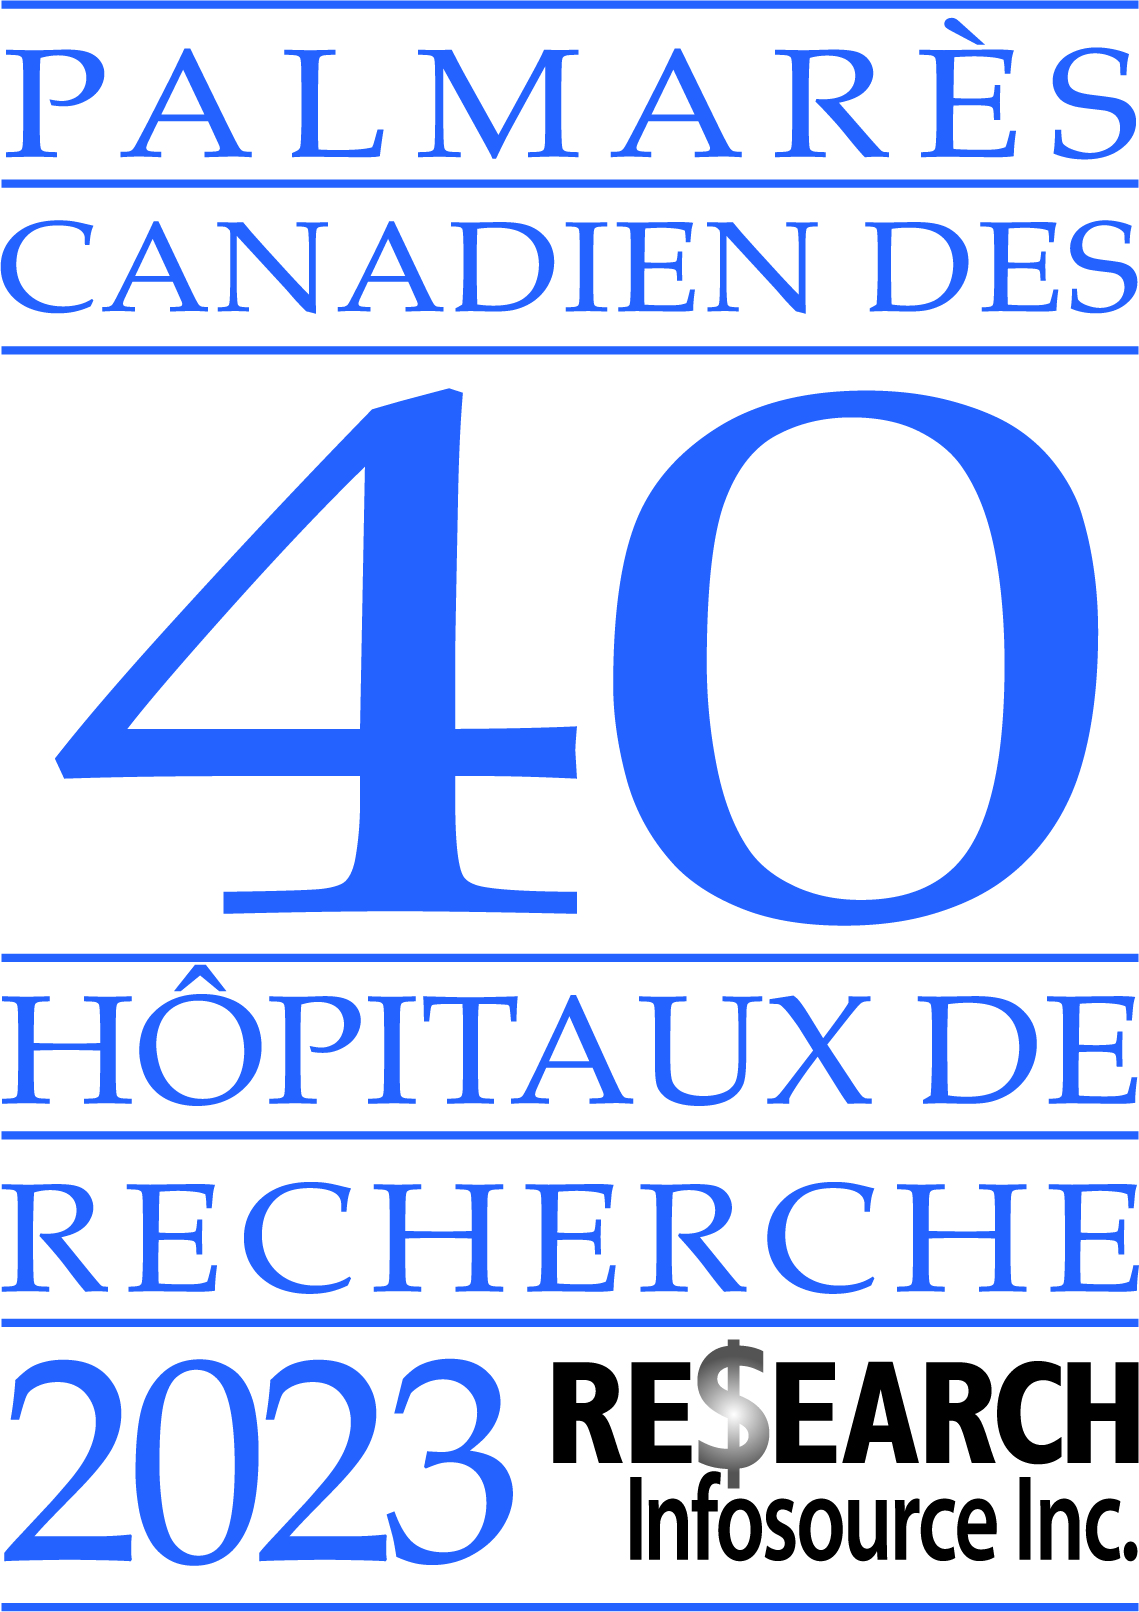 Canadian top 40 research hospital list 2023